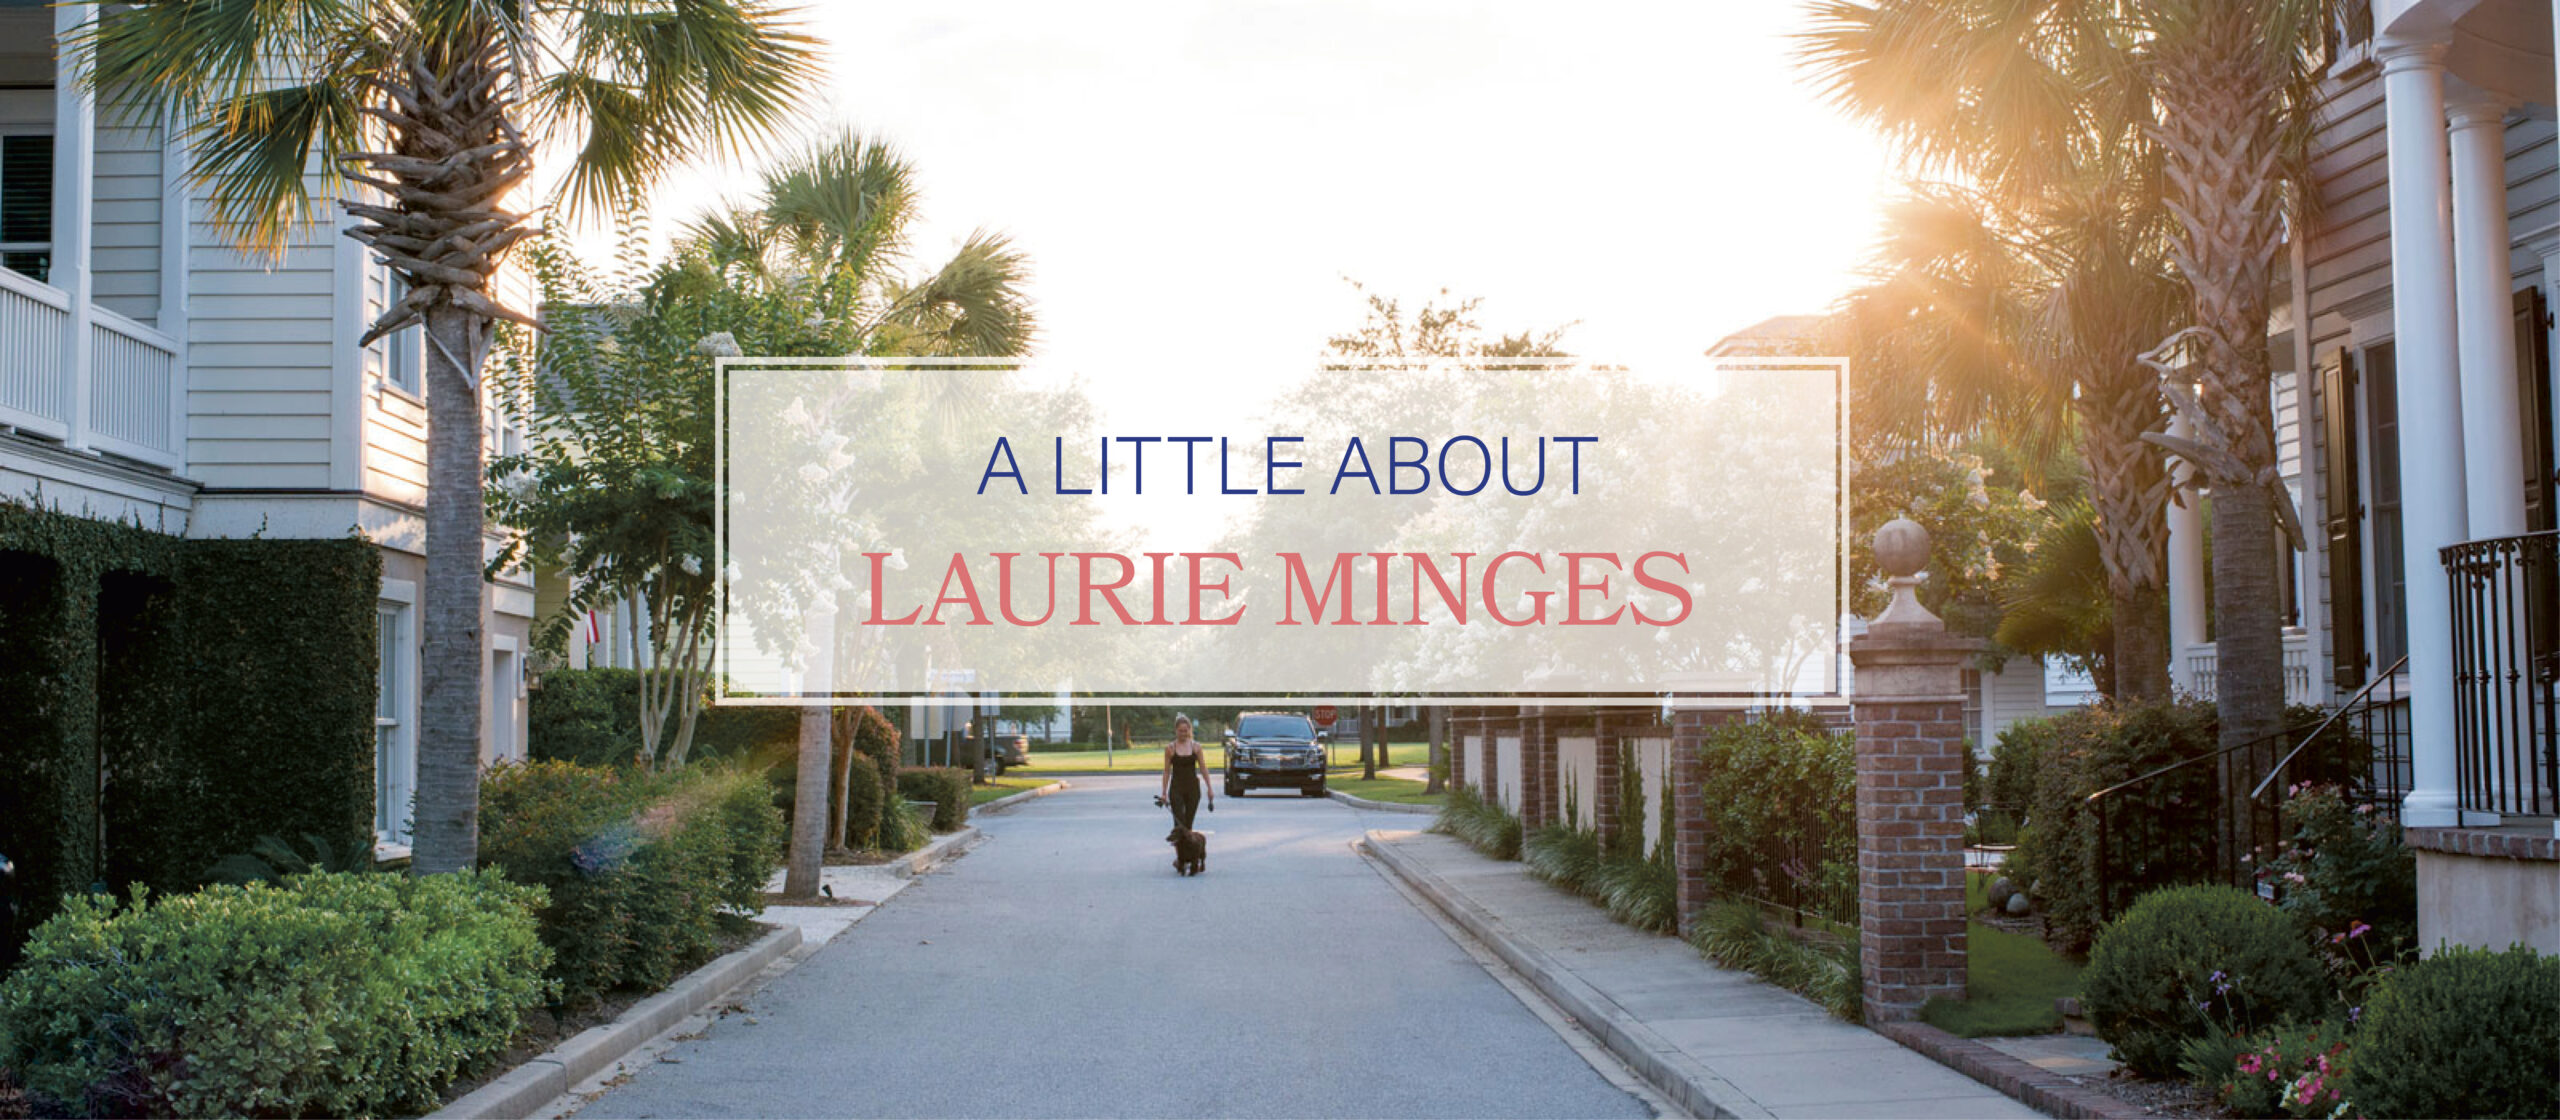 About Laurie Minges